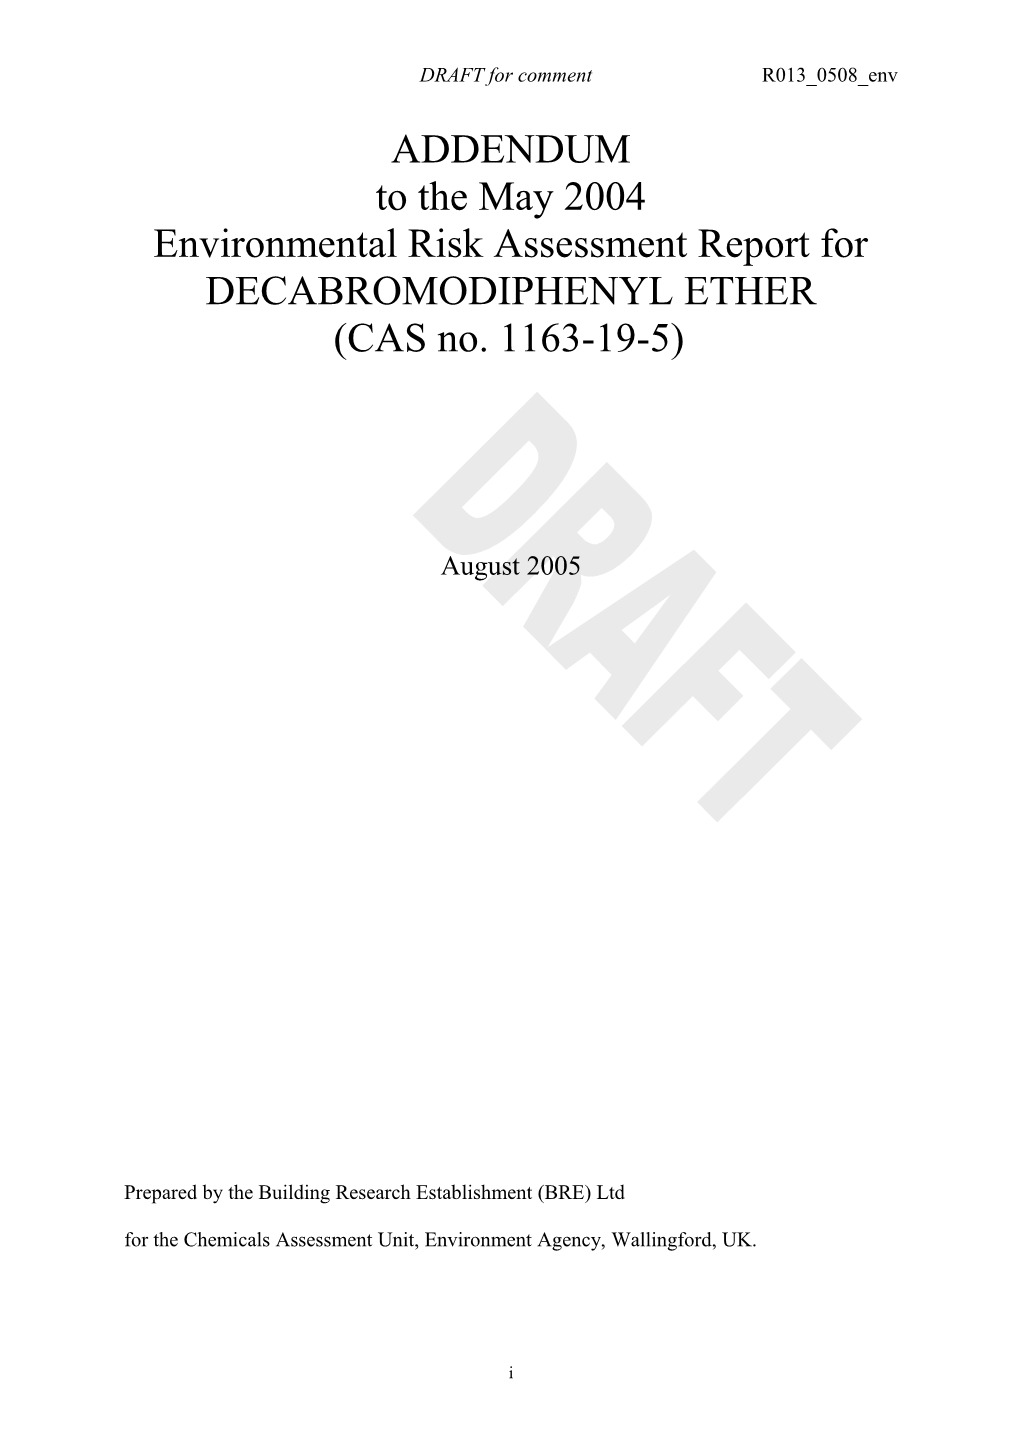 0 Overall Results Of The Risk Assessment